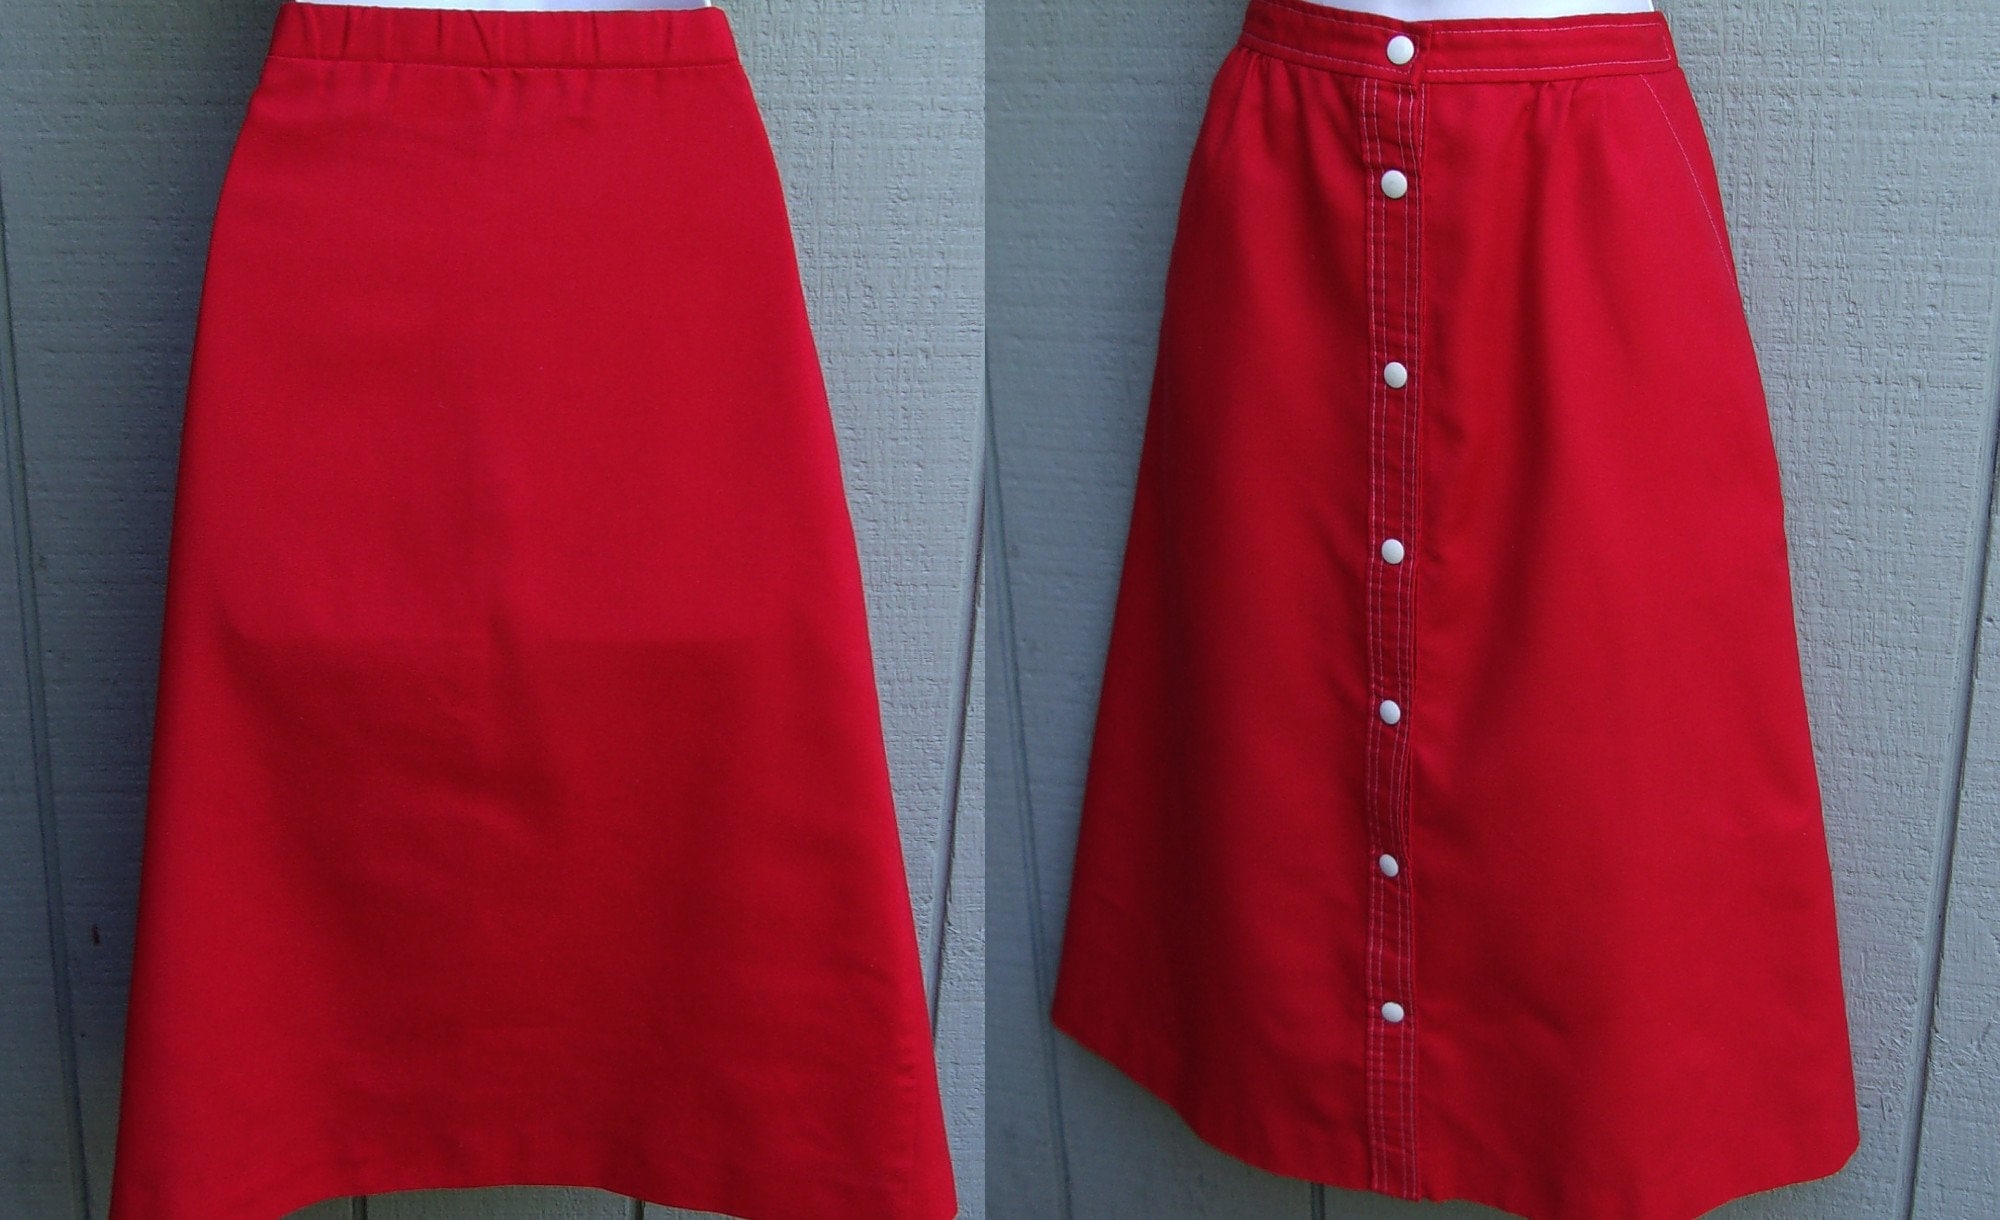 Donnkenny 70S Skirt ~ Red Cotton Blend Front Snap Up Midi Summer High Waisted 29 Waist Size 10 Med